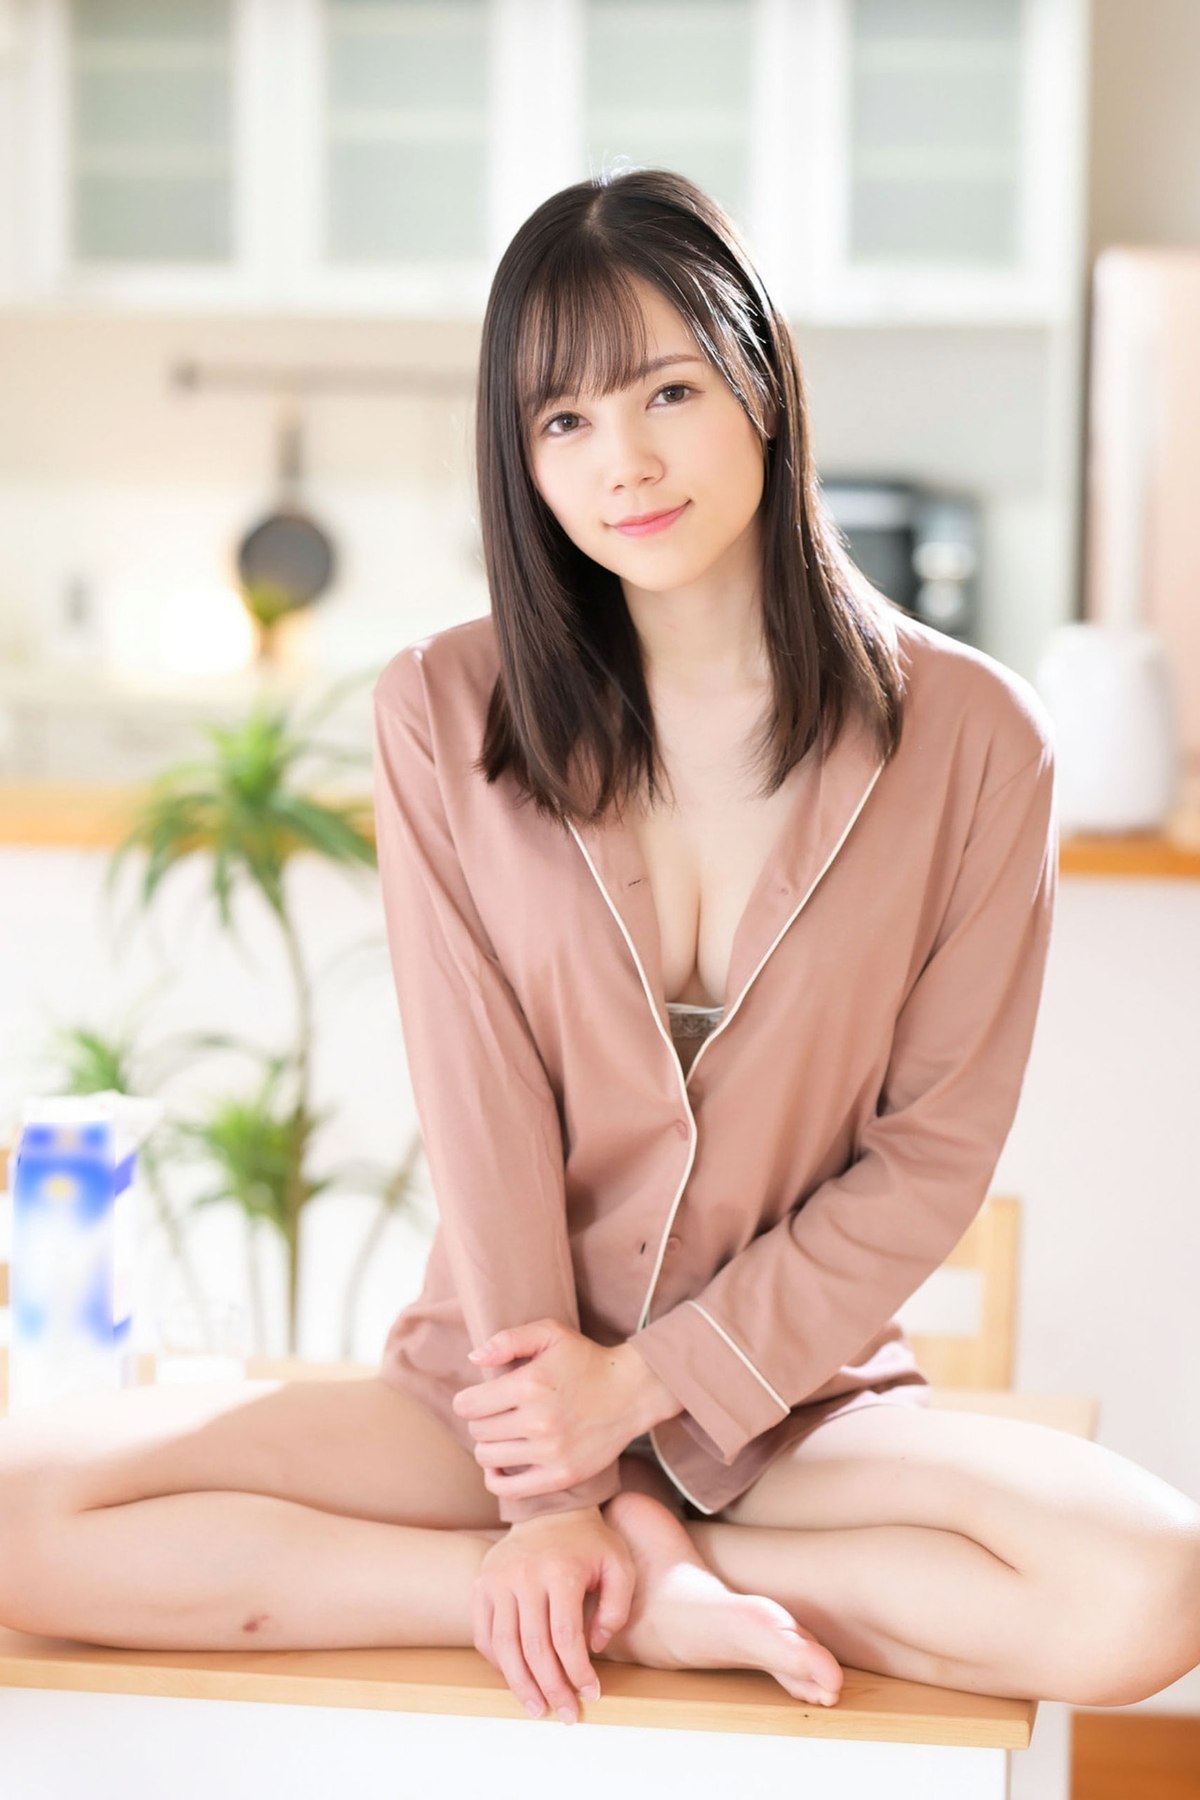 Photobook Remu Suzumori 涼森れむ Ejaculates And Lives Together A 0004 2746154705.jpg